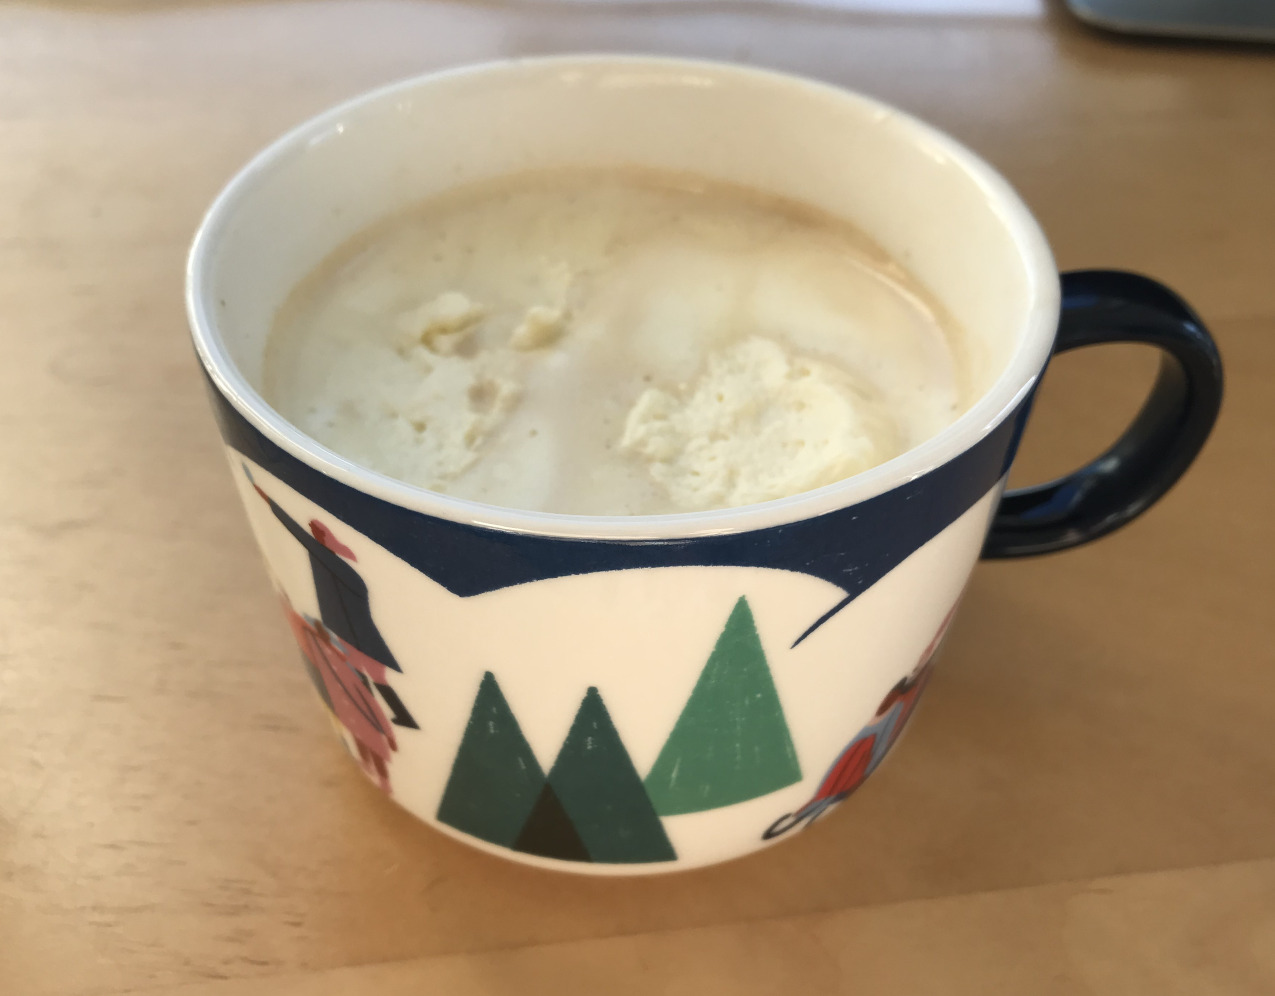 A cup of coffee with cream